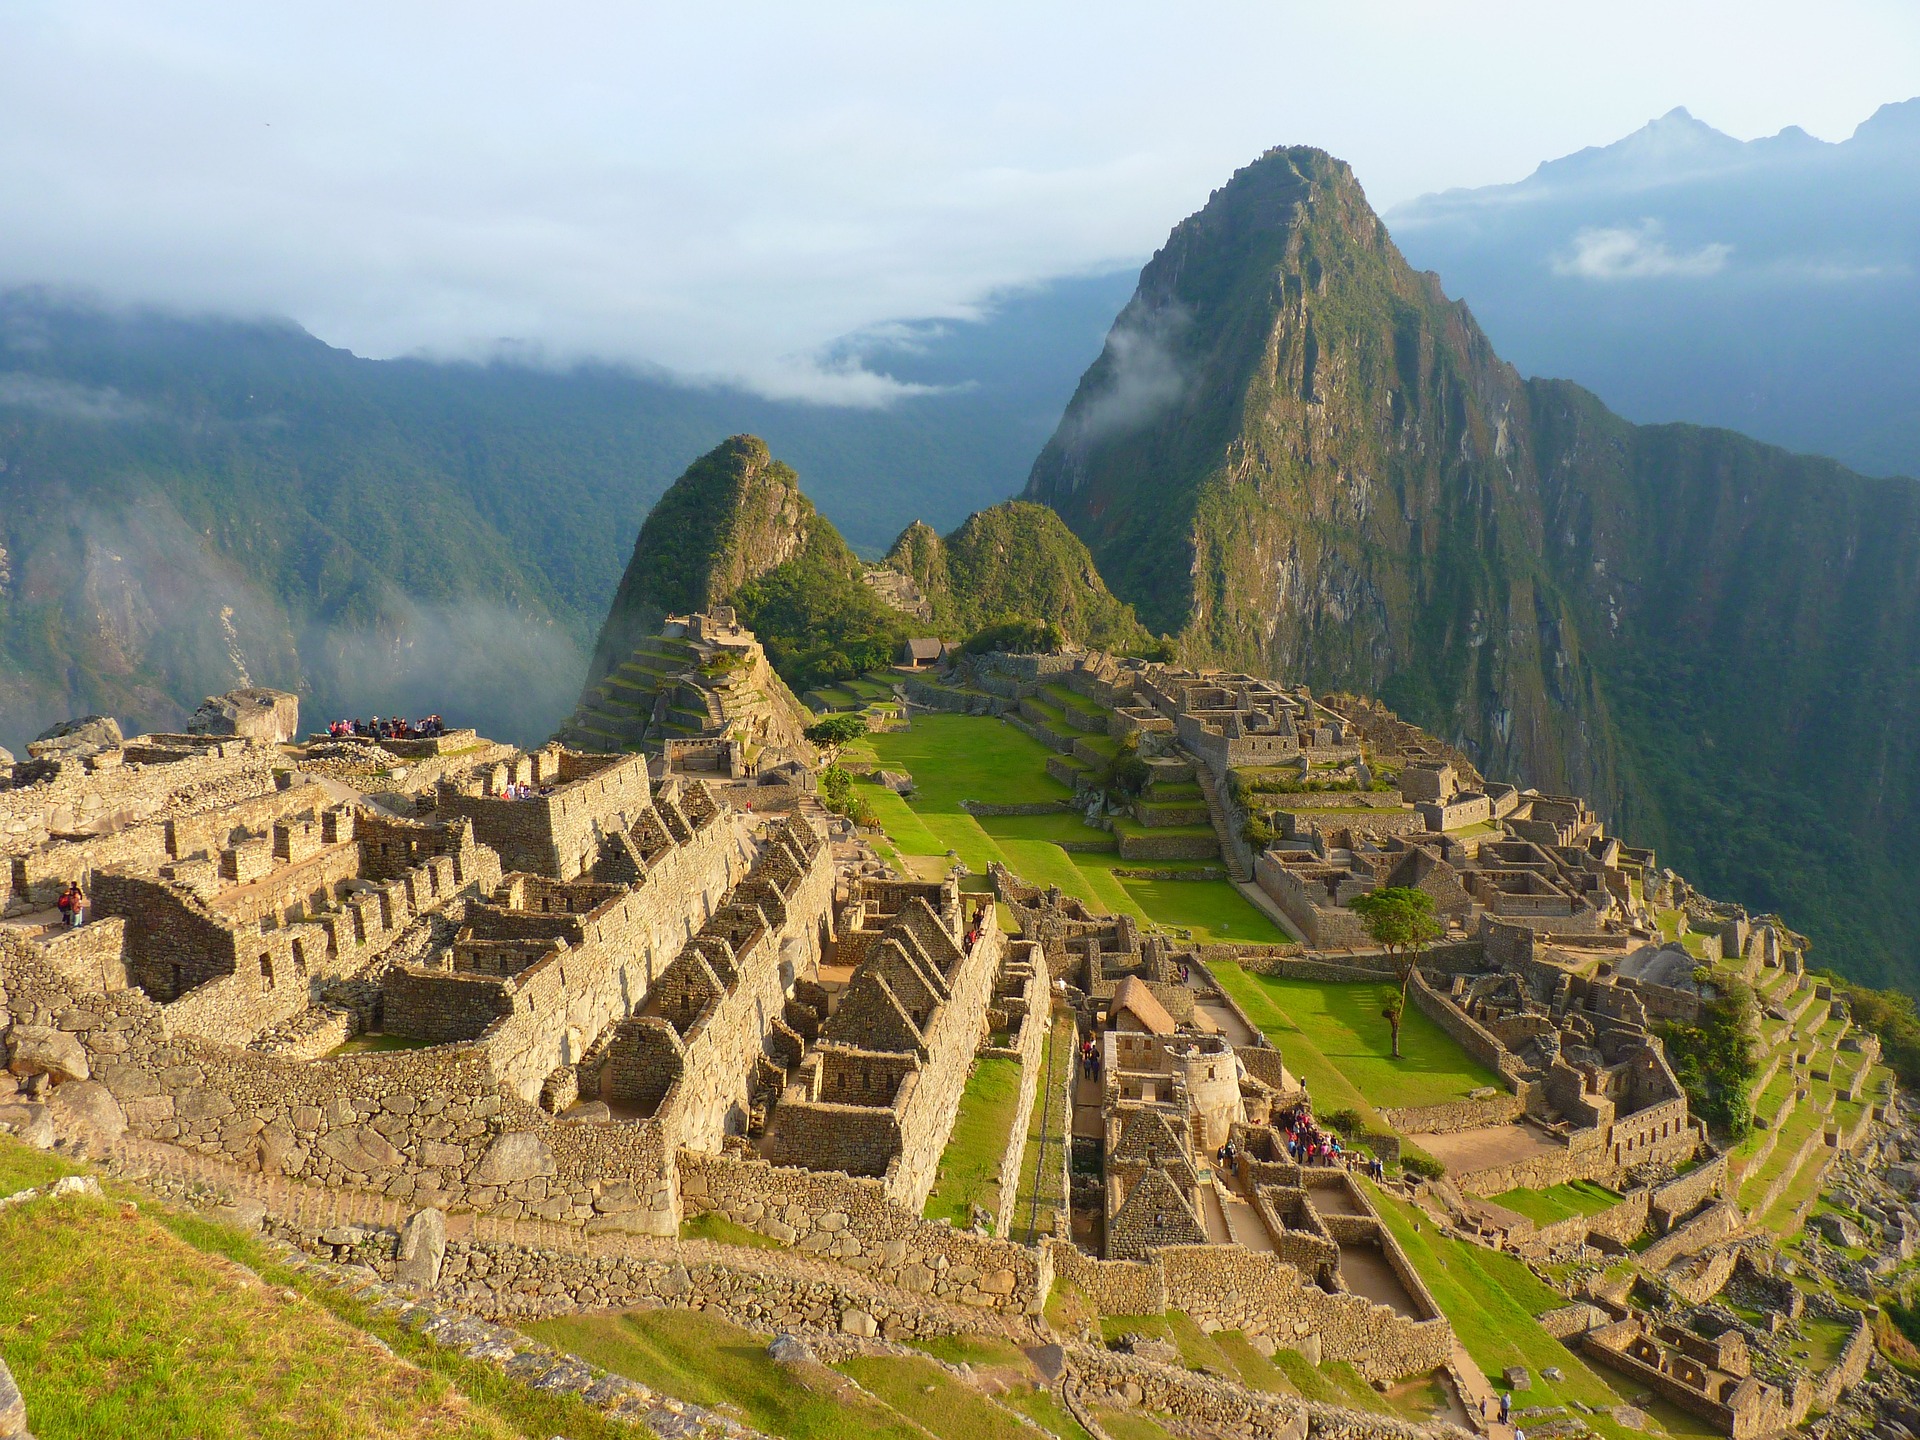 Visitng Peru is again possible with a special app on your phone